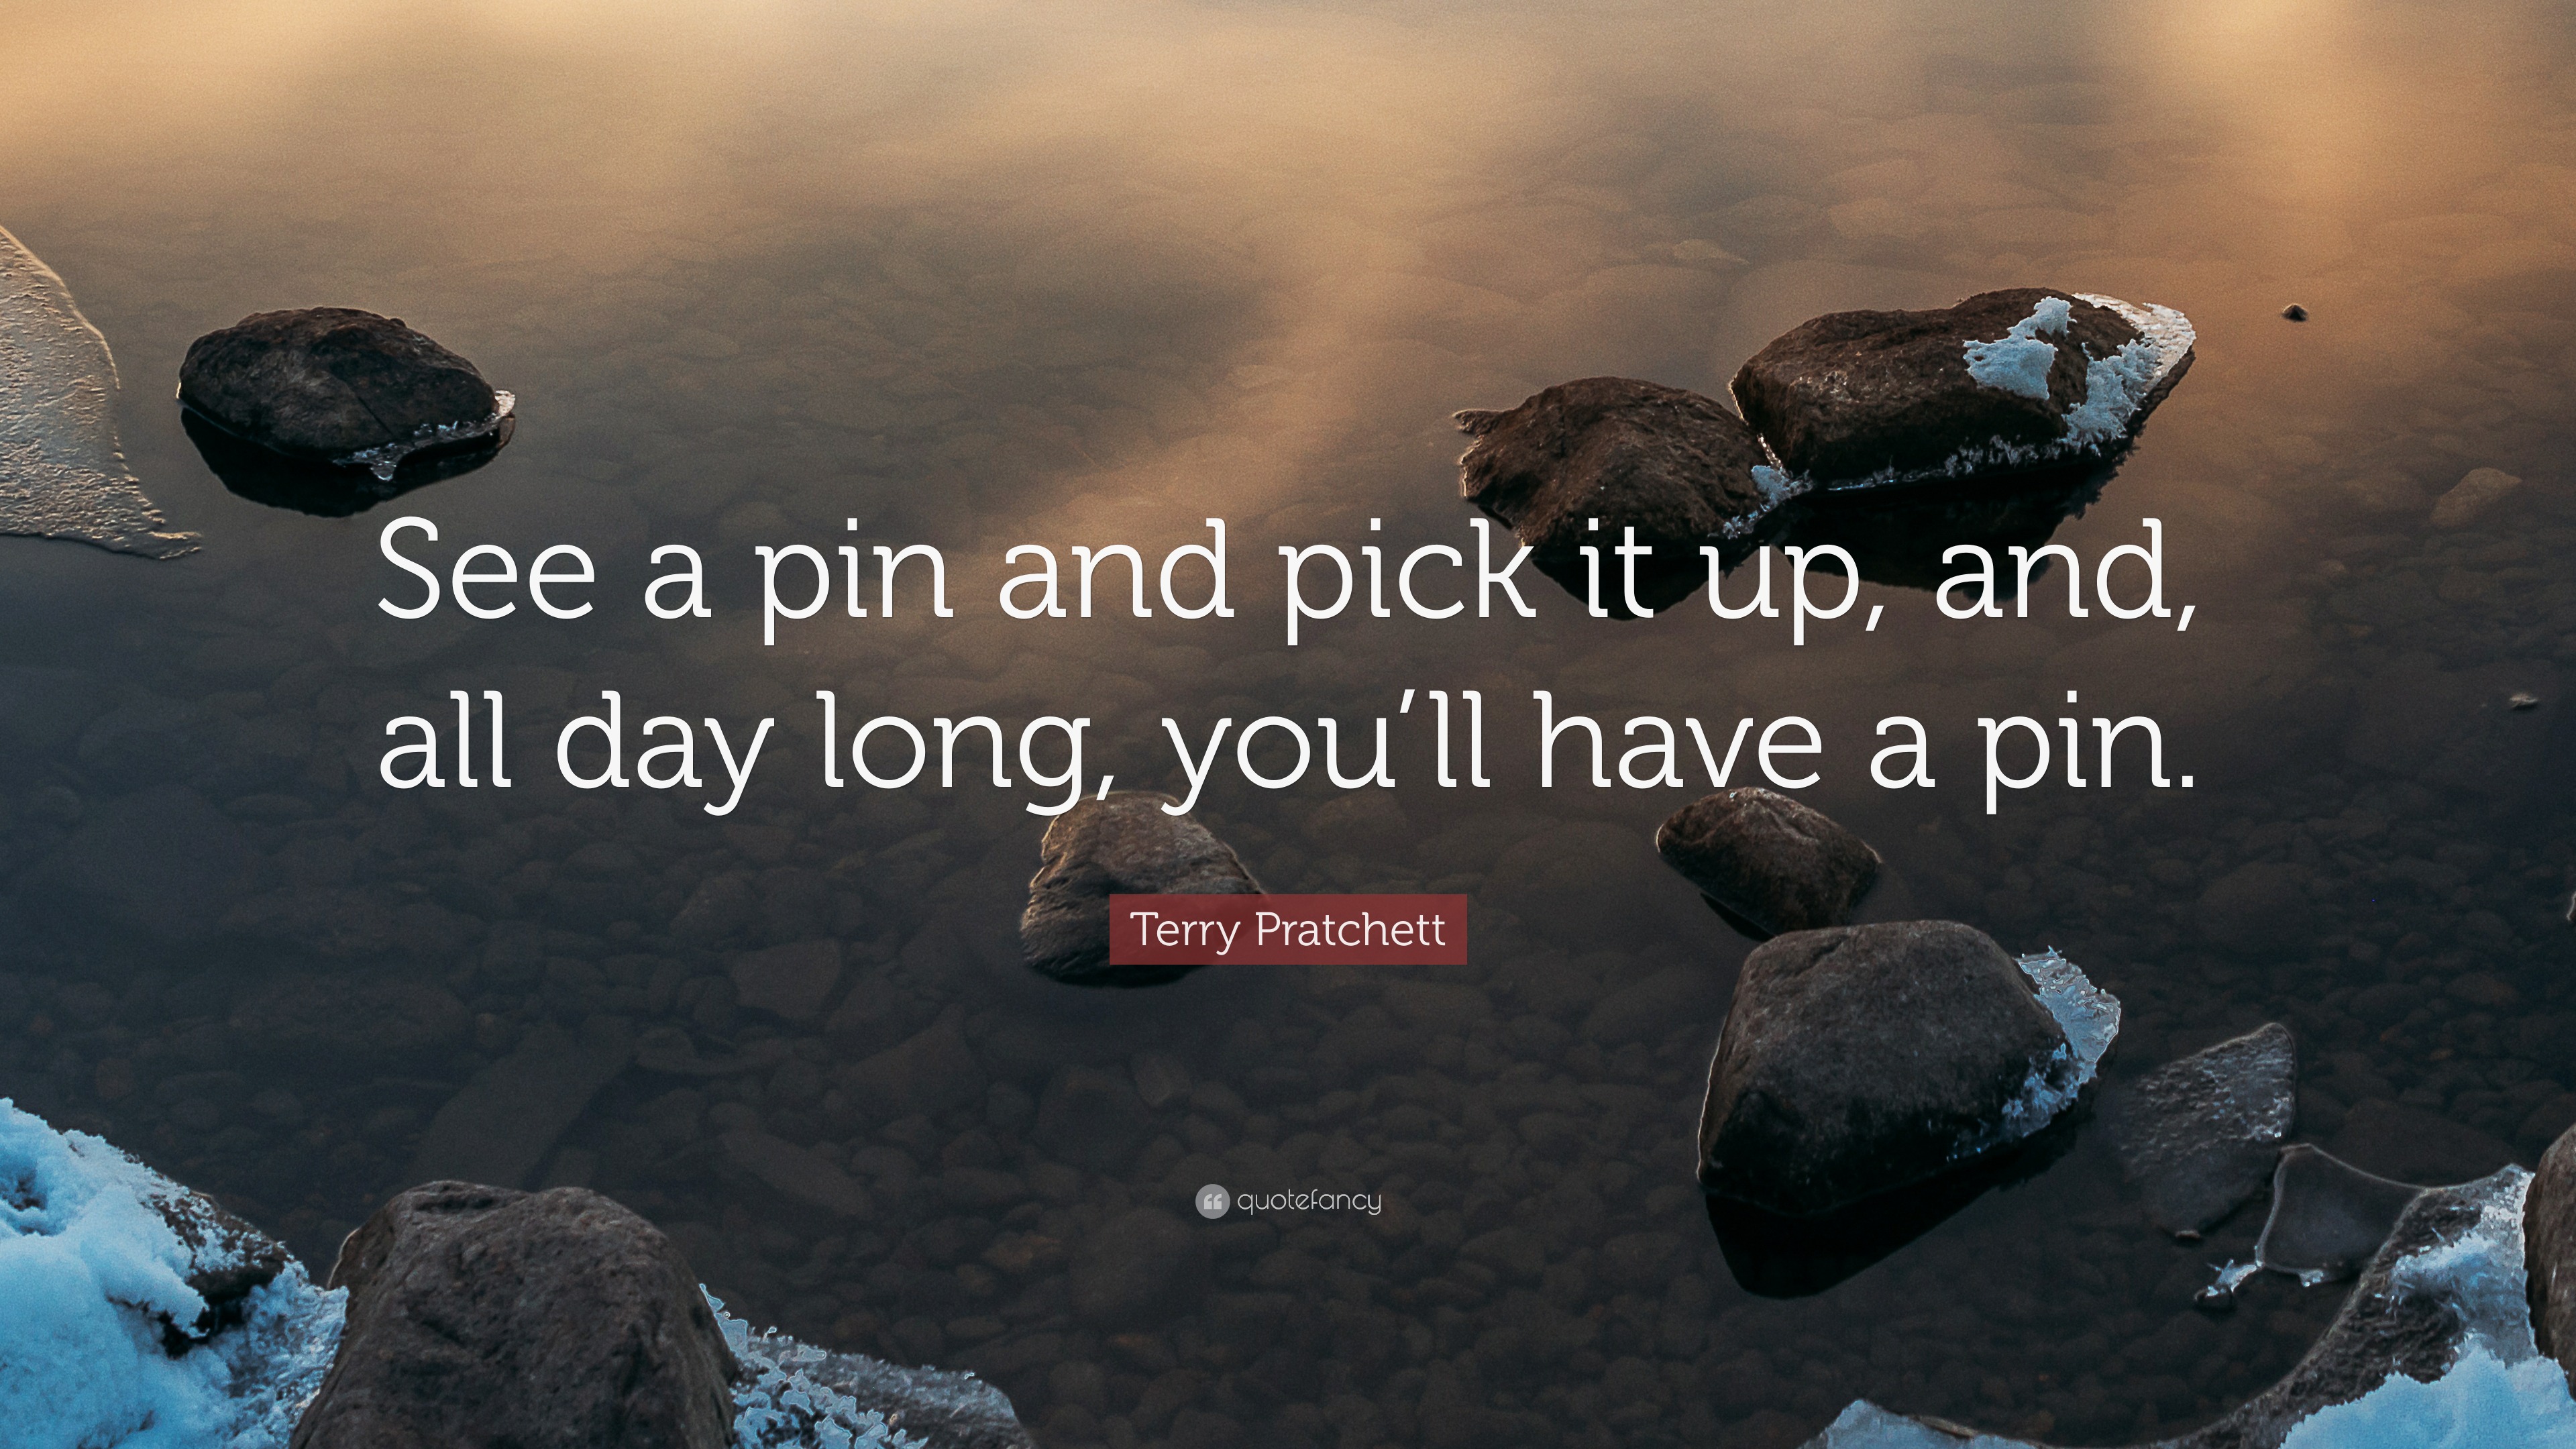 https://quotefancy.com/media/wallpaper/3840x2160/5143117-Terry-Pratchett-Quote-See-a-pin-and-pick-it-up-and-all-day-long.jpg